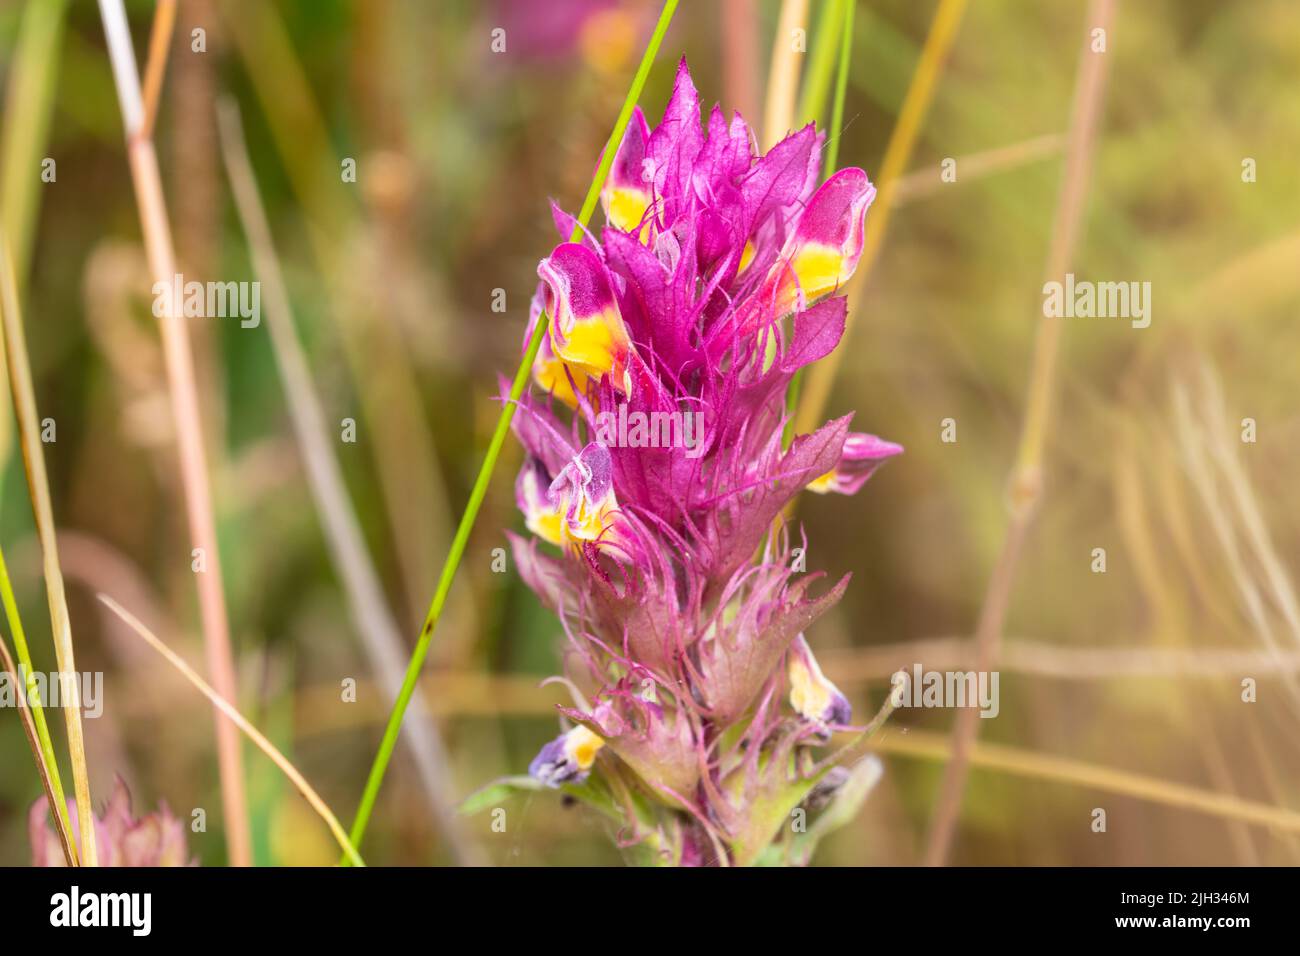 A single flower head of Melampyrum arvense, commonly known as field cow-wheat. Stock Photo